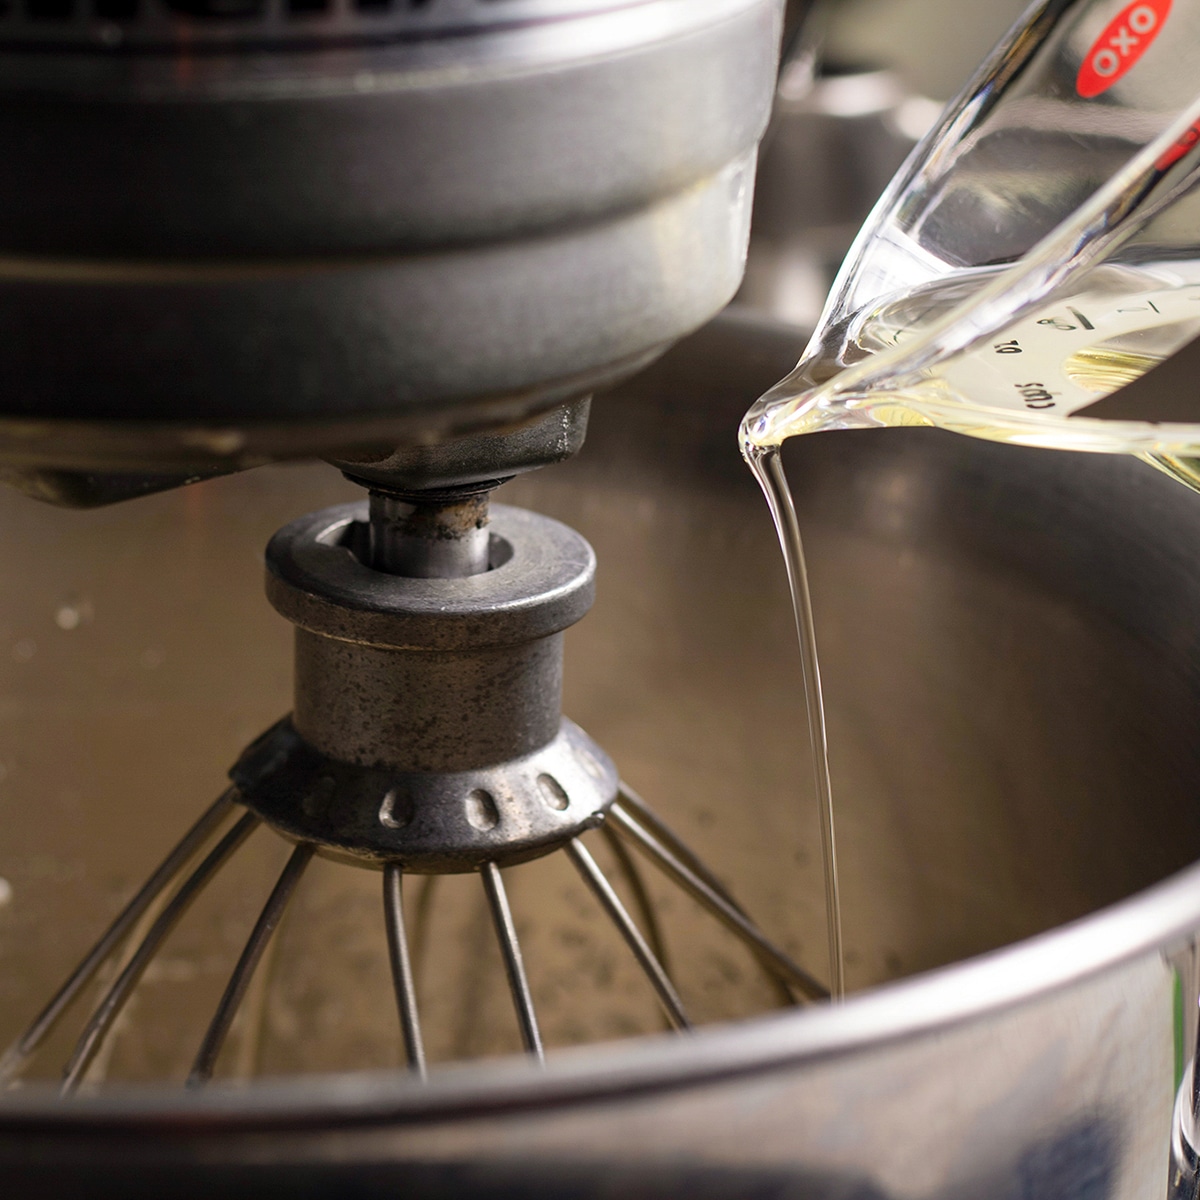 Pouring olive oil into cake batter while an electric mixer beats the oil into the batter.